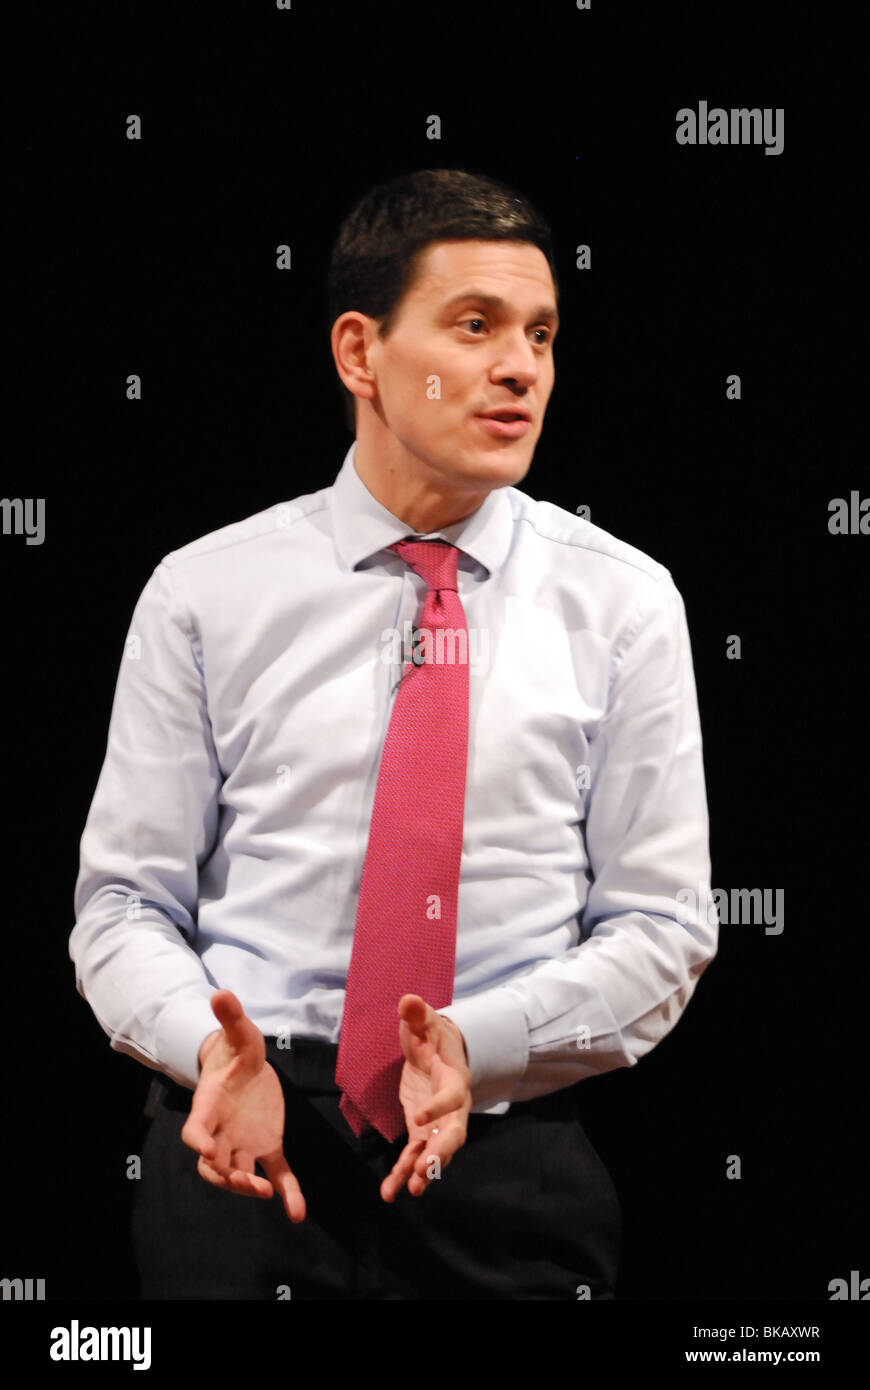 British Foreign Secretary David Miliband gives a public speech at St. Paul's church in Hammersmith, West London. Stock Photo